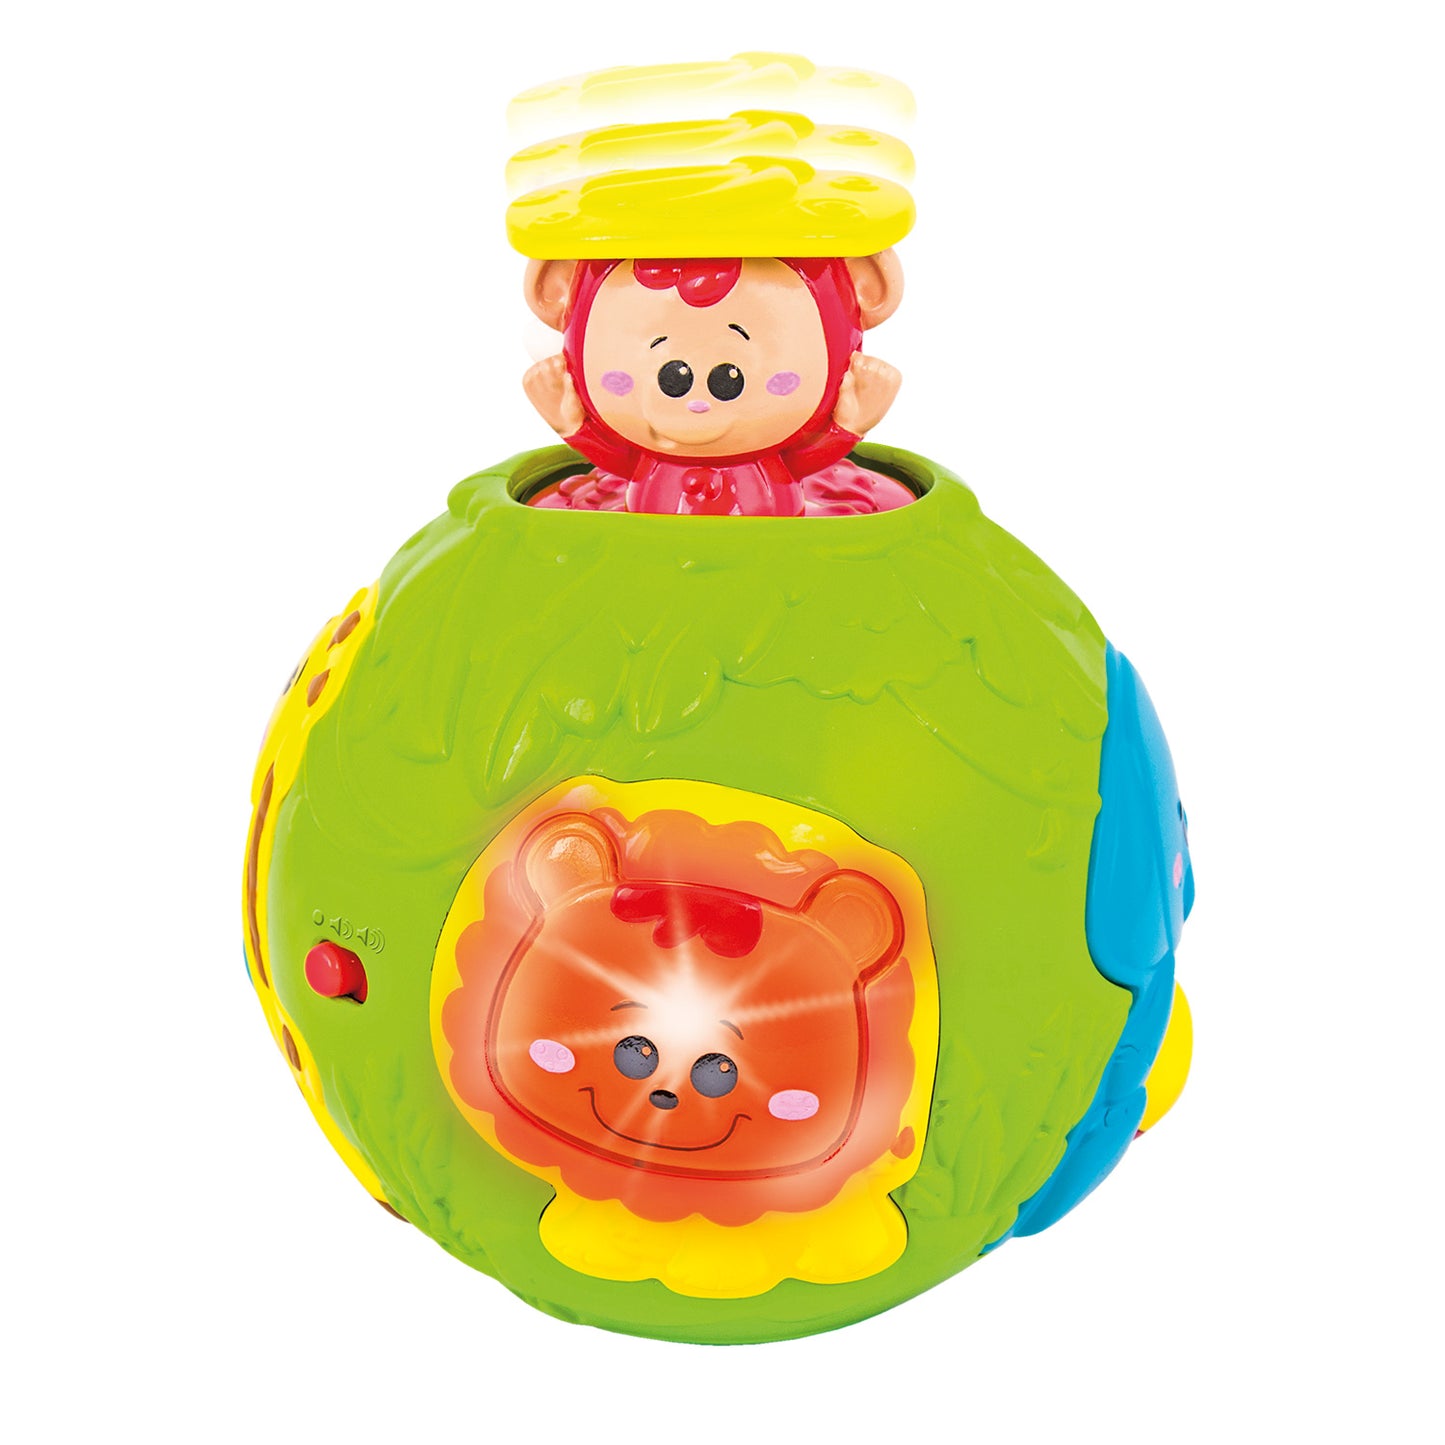 Jungle Animal Roll & Learn Activity Ball for Babies 6 Months+